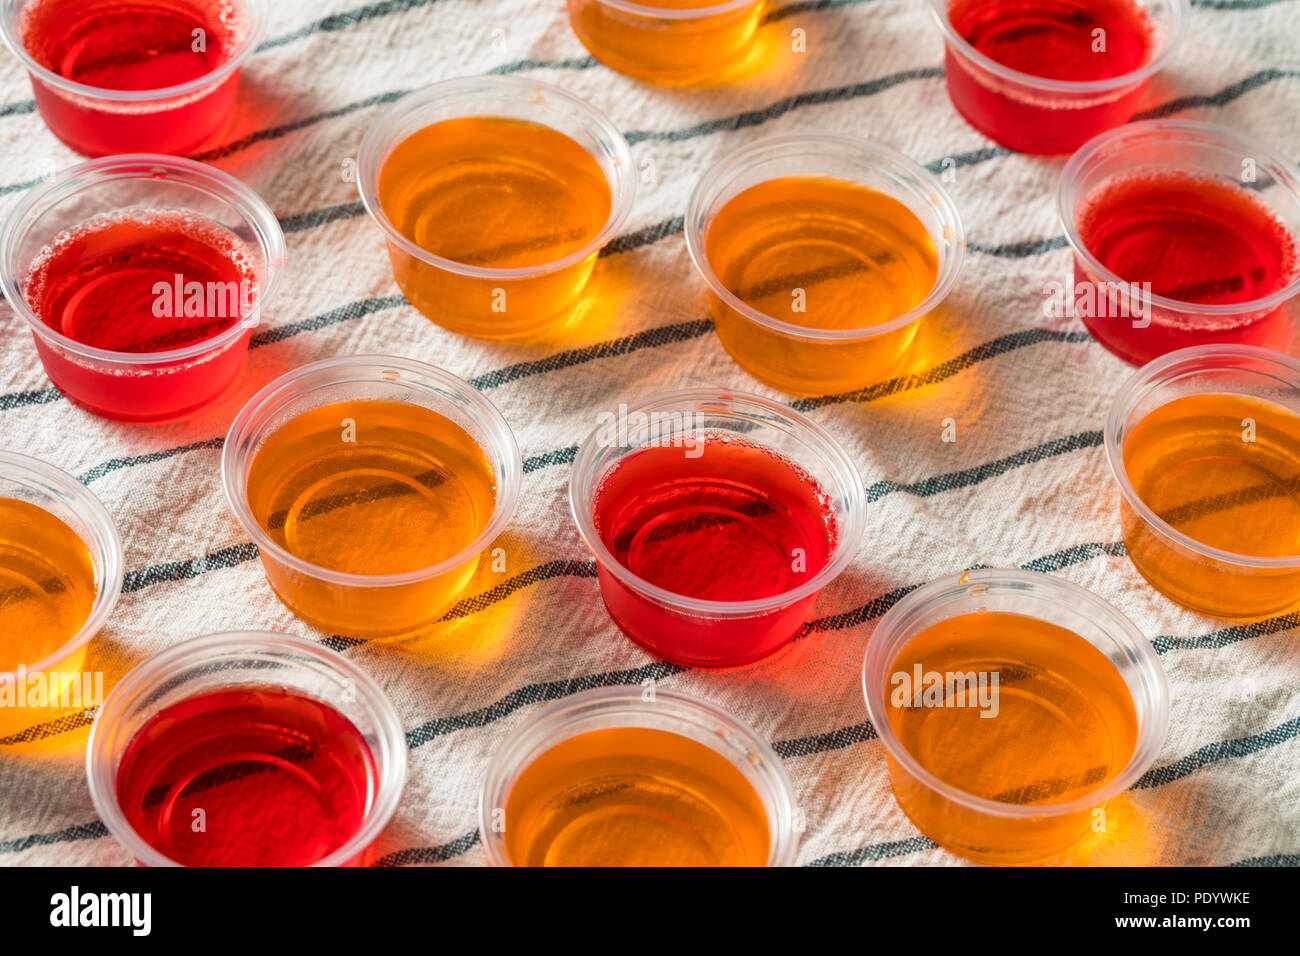 Red Green Jelly Clear Plastic Cup Stock Photo 1089470468